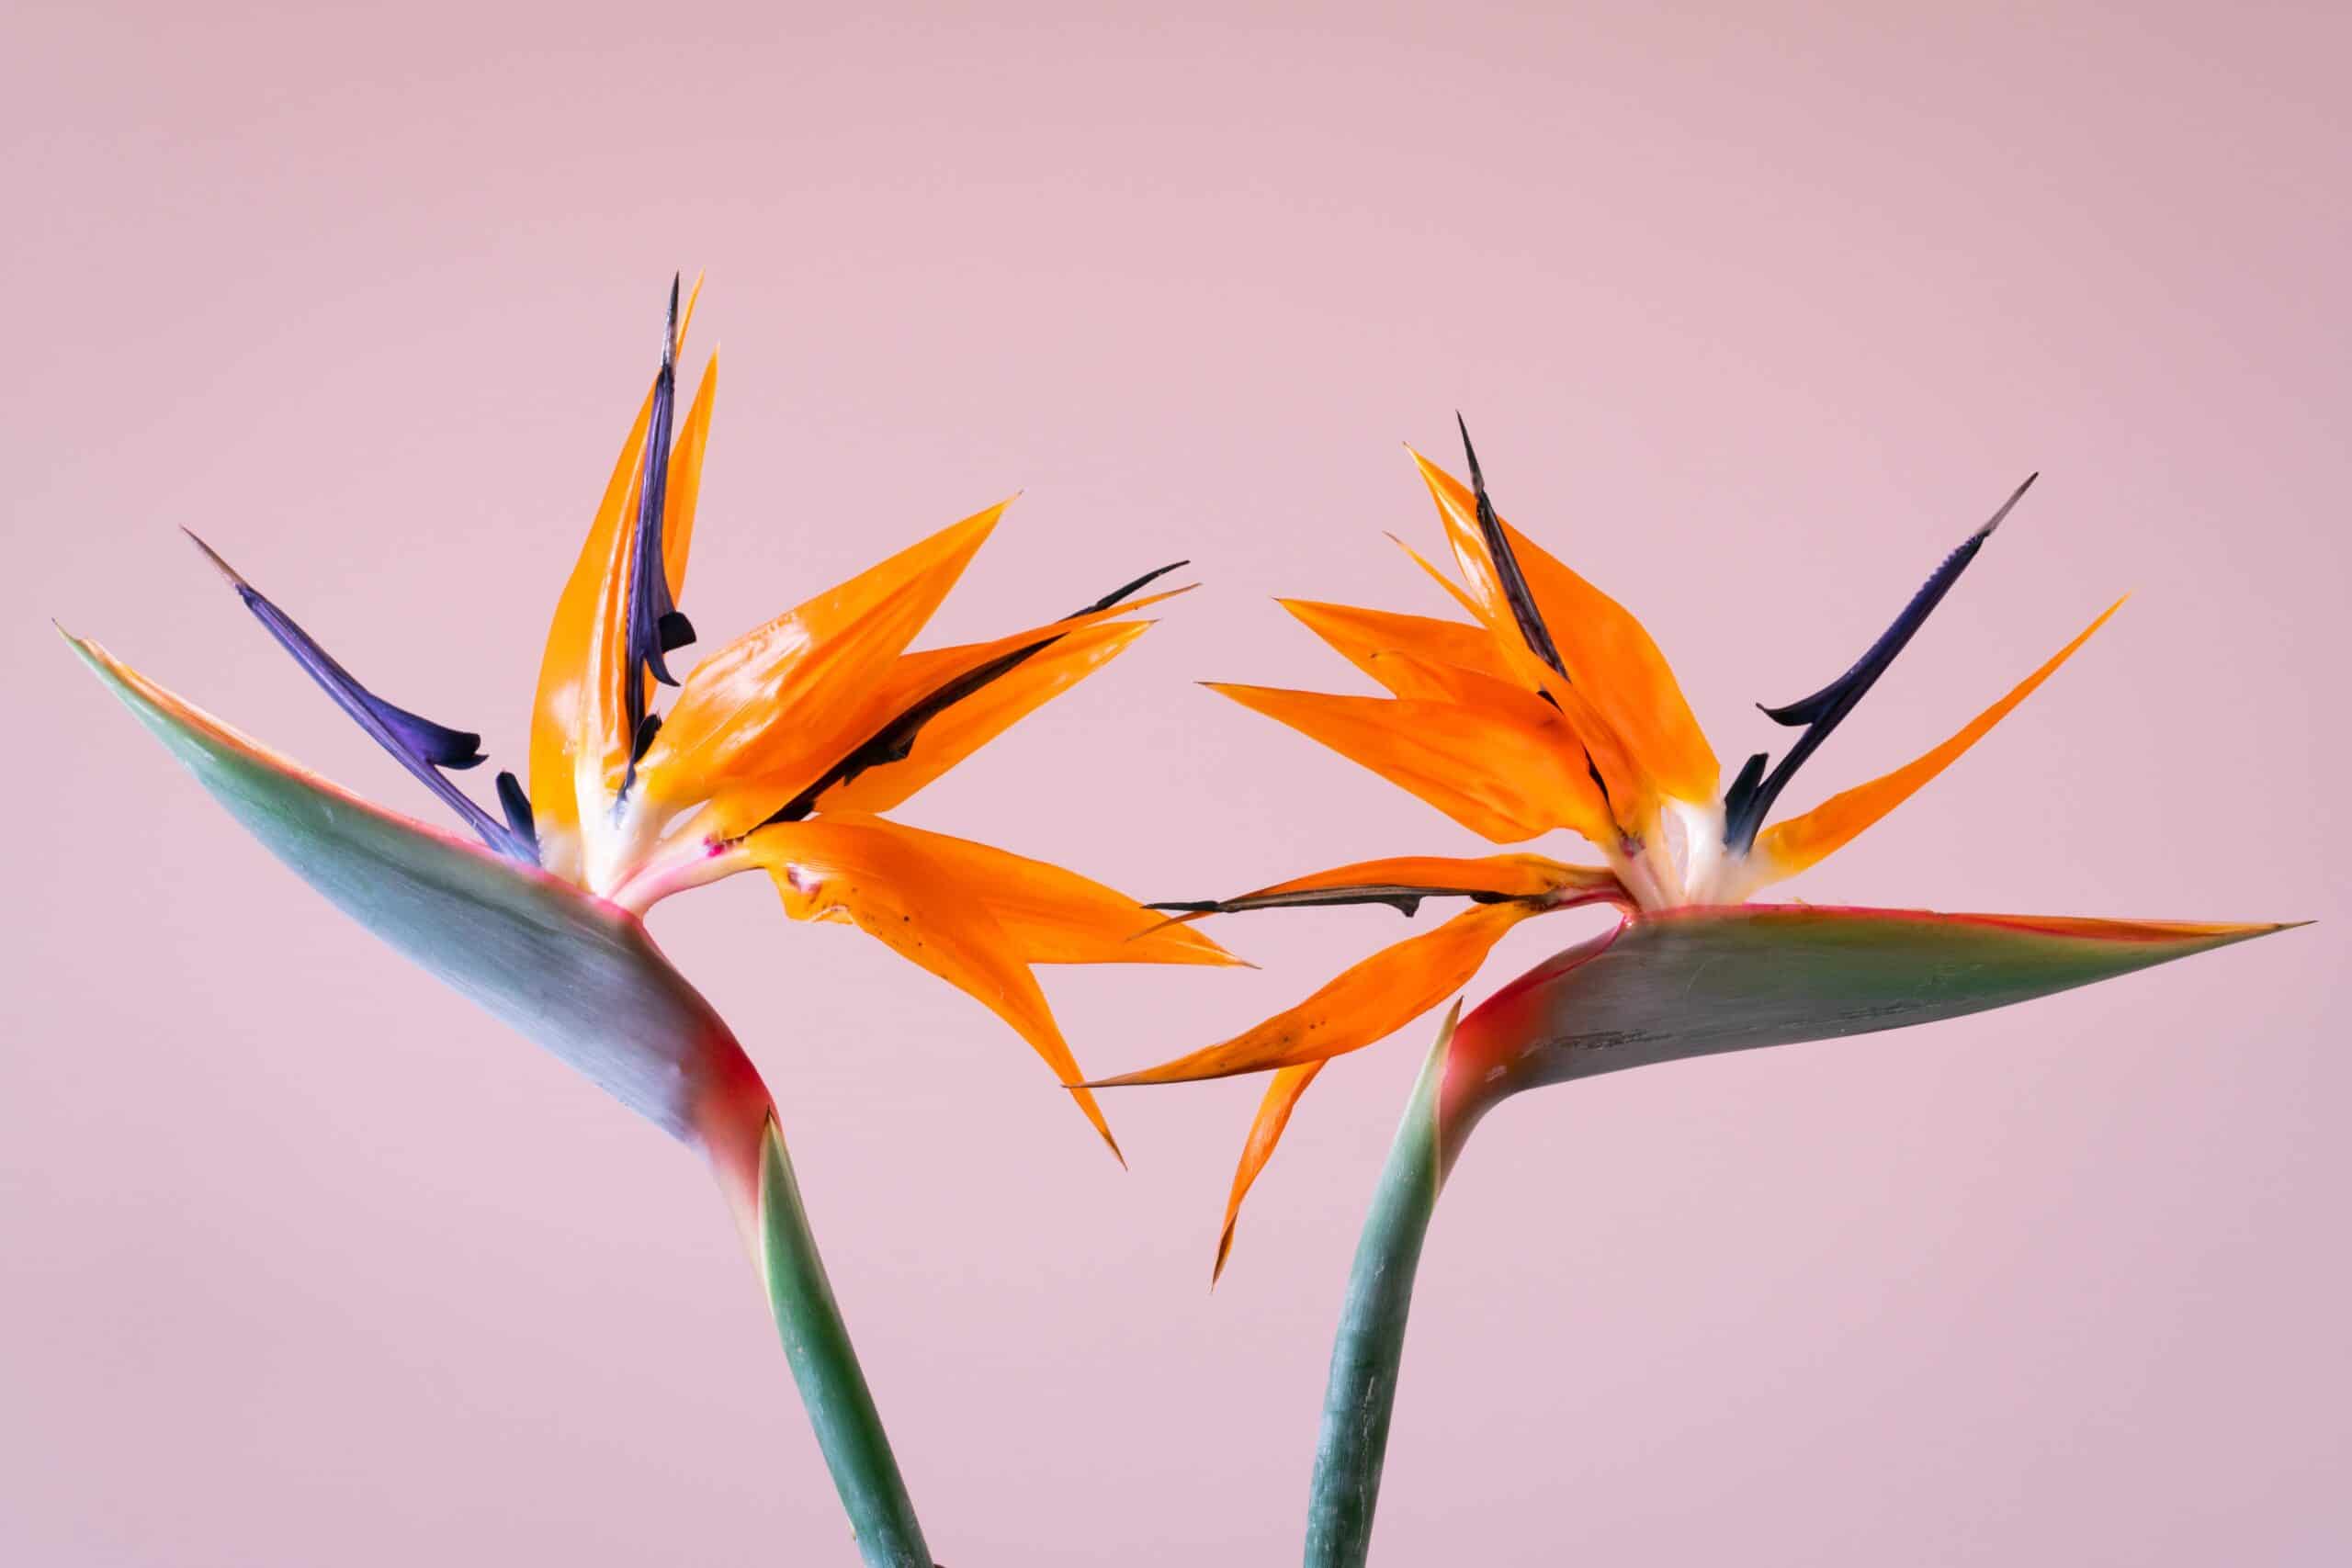 Bird of paradise meaning and symbolism